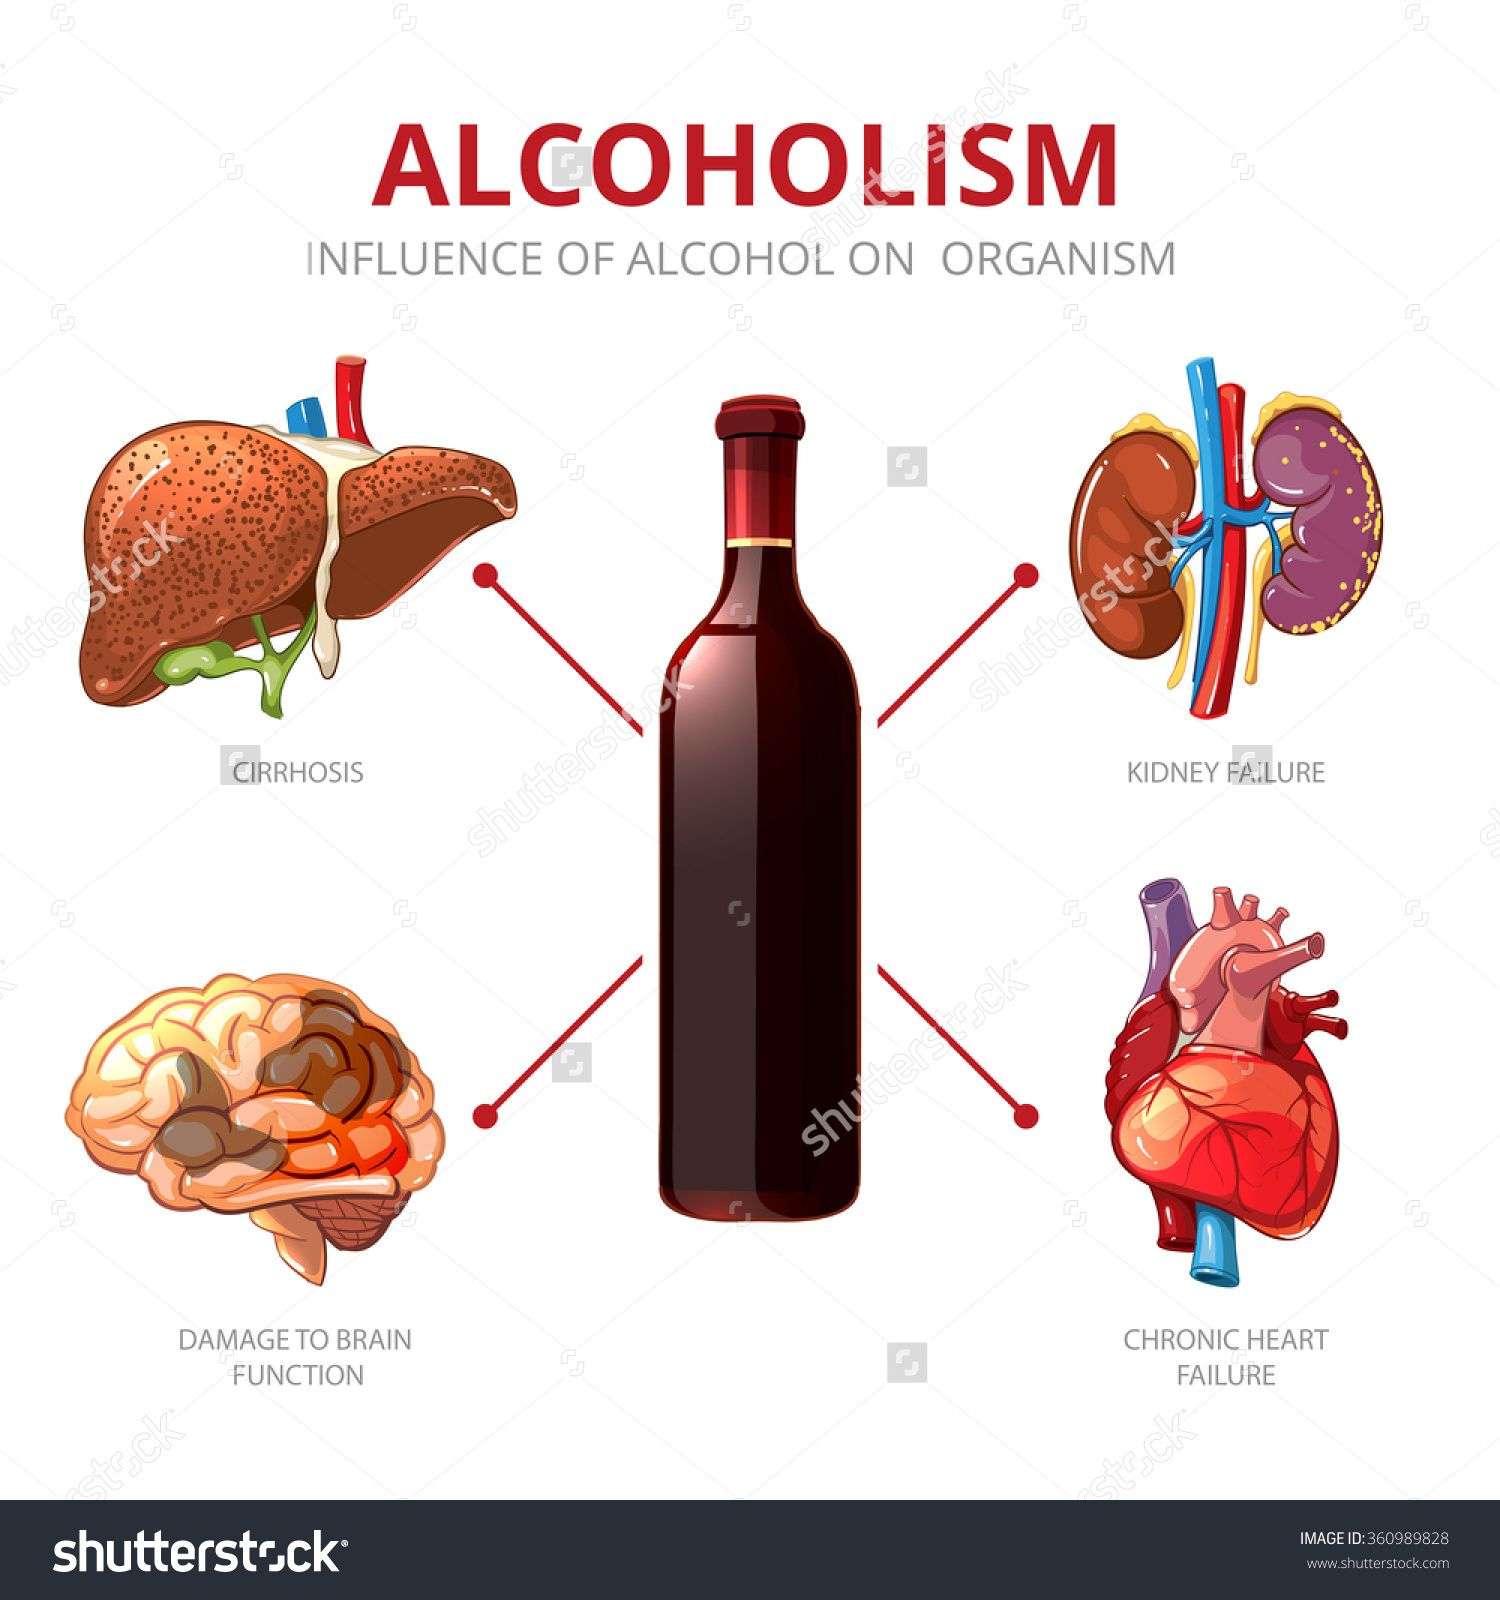 Drinking Alcohol Can Affect your Kidneys